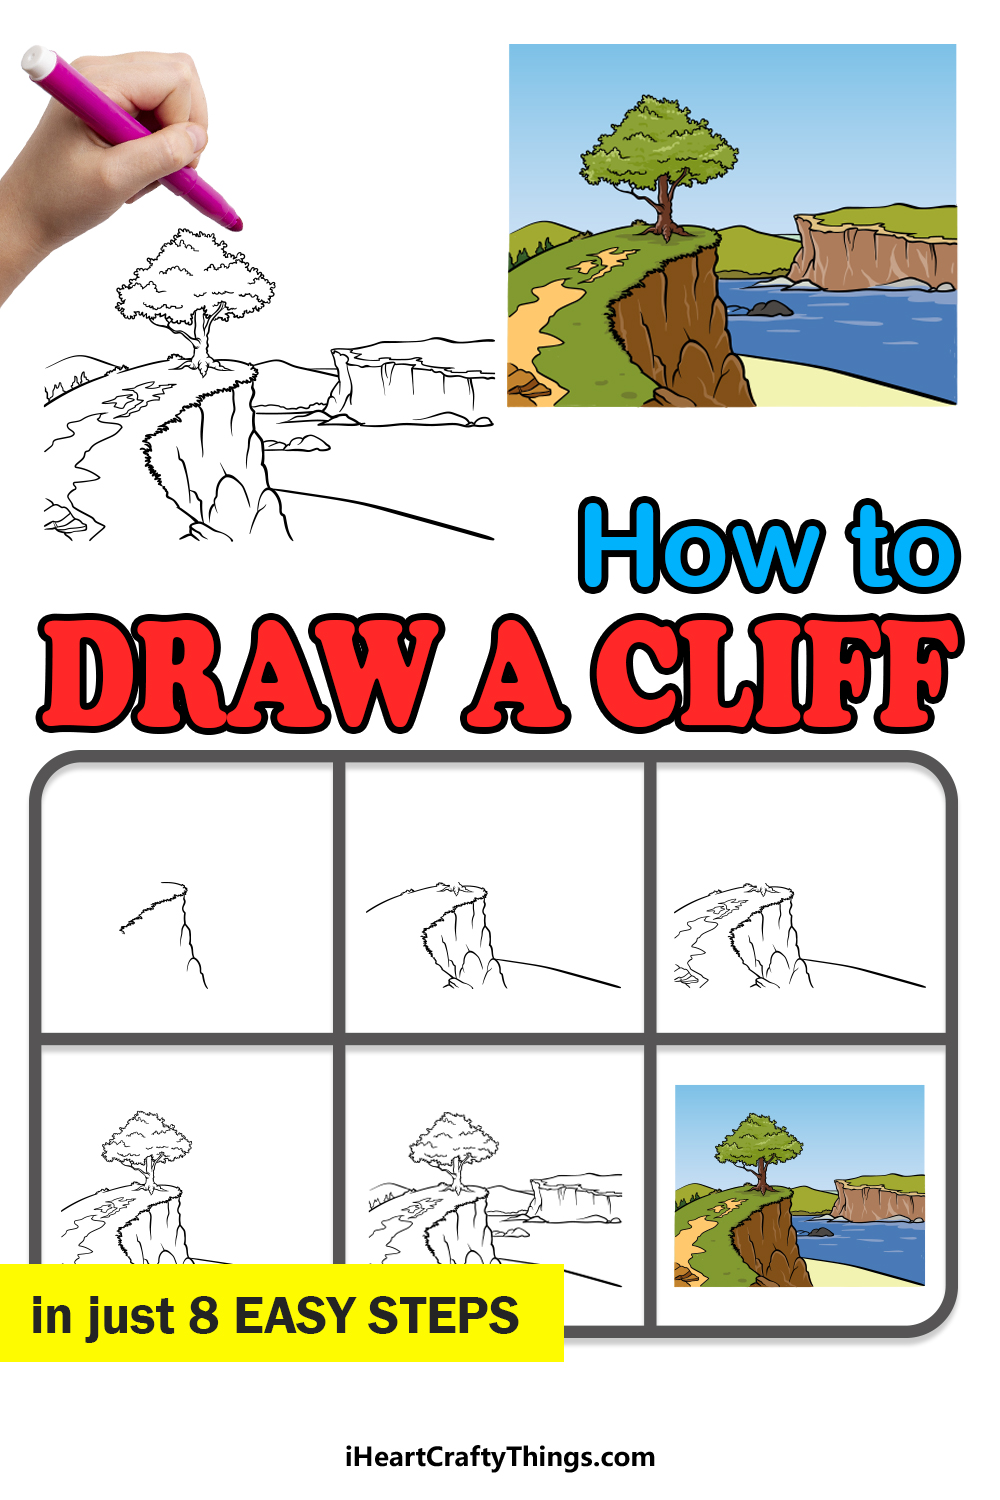 how to draw a cliff in 8 easy steps